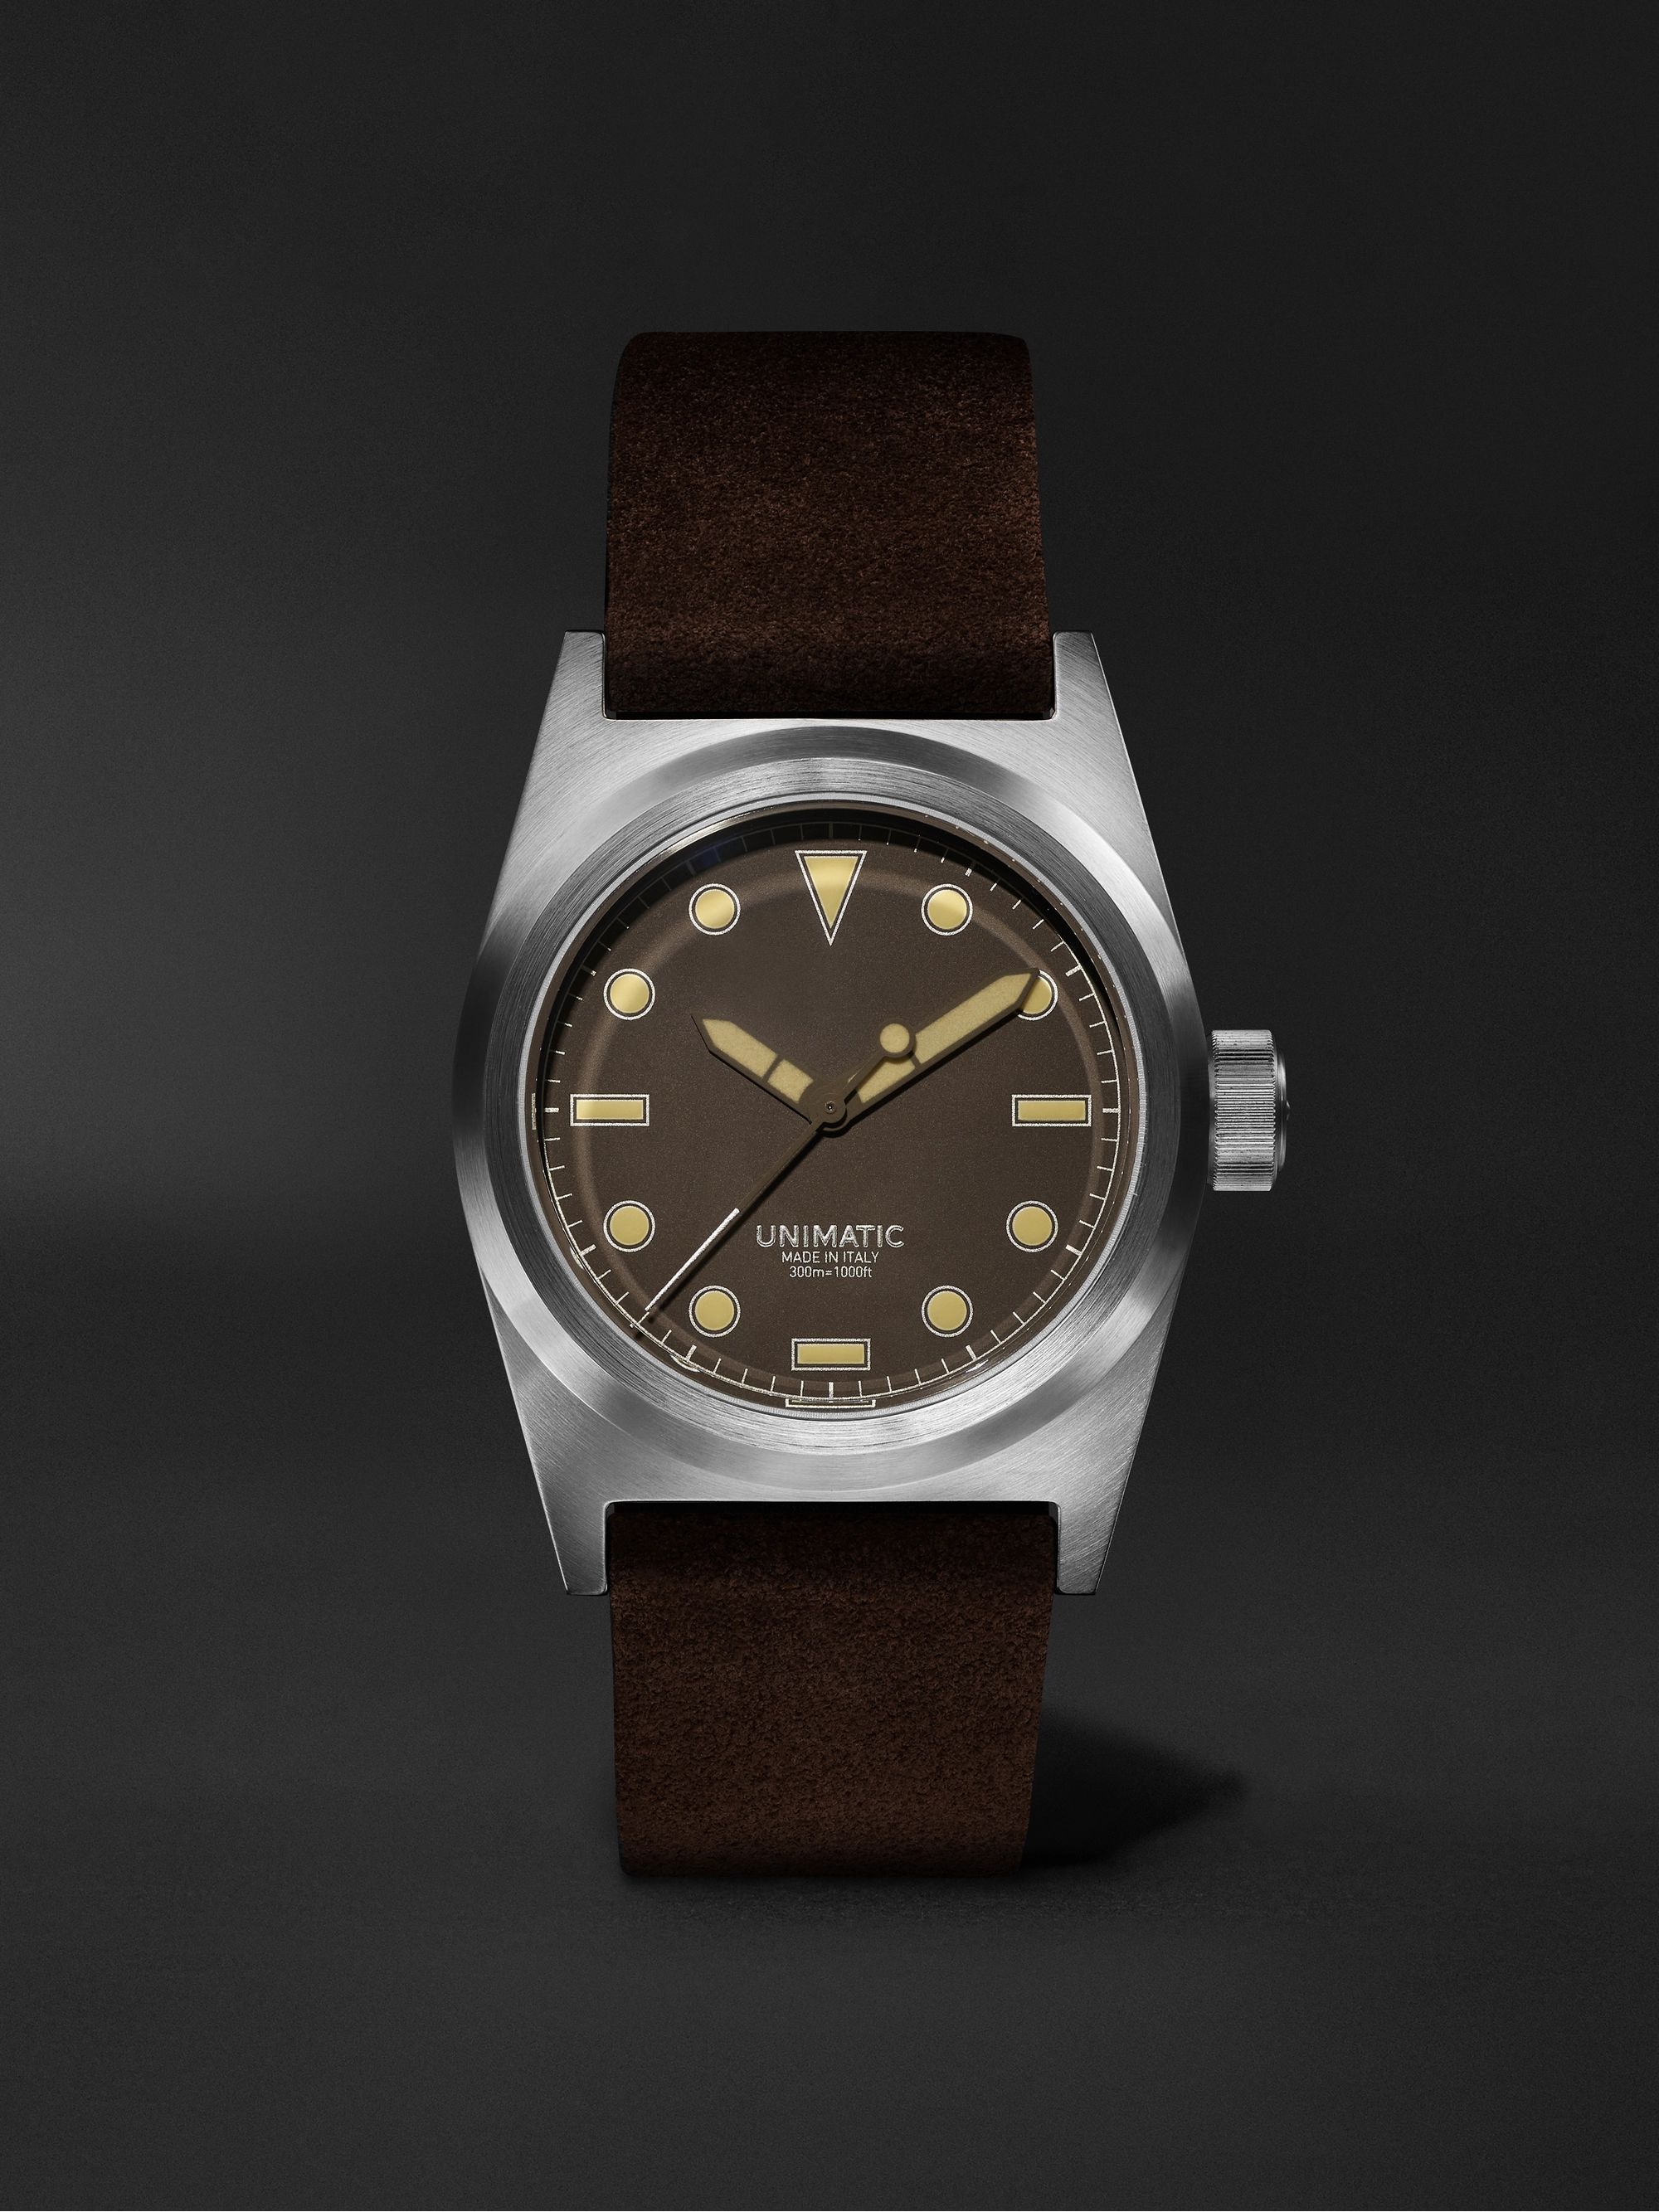 UNIMATIC Modello Due Limited Edition Automatic 38mm Stainless Steel and Suede Watch, Ref. No. U2S-MB